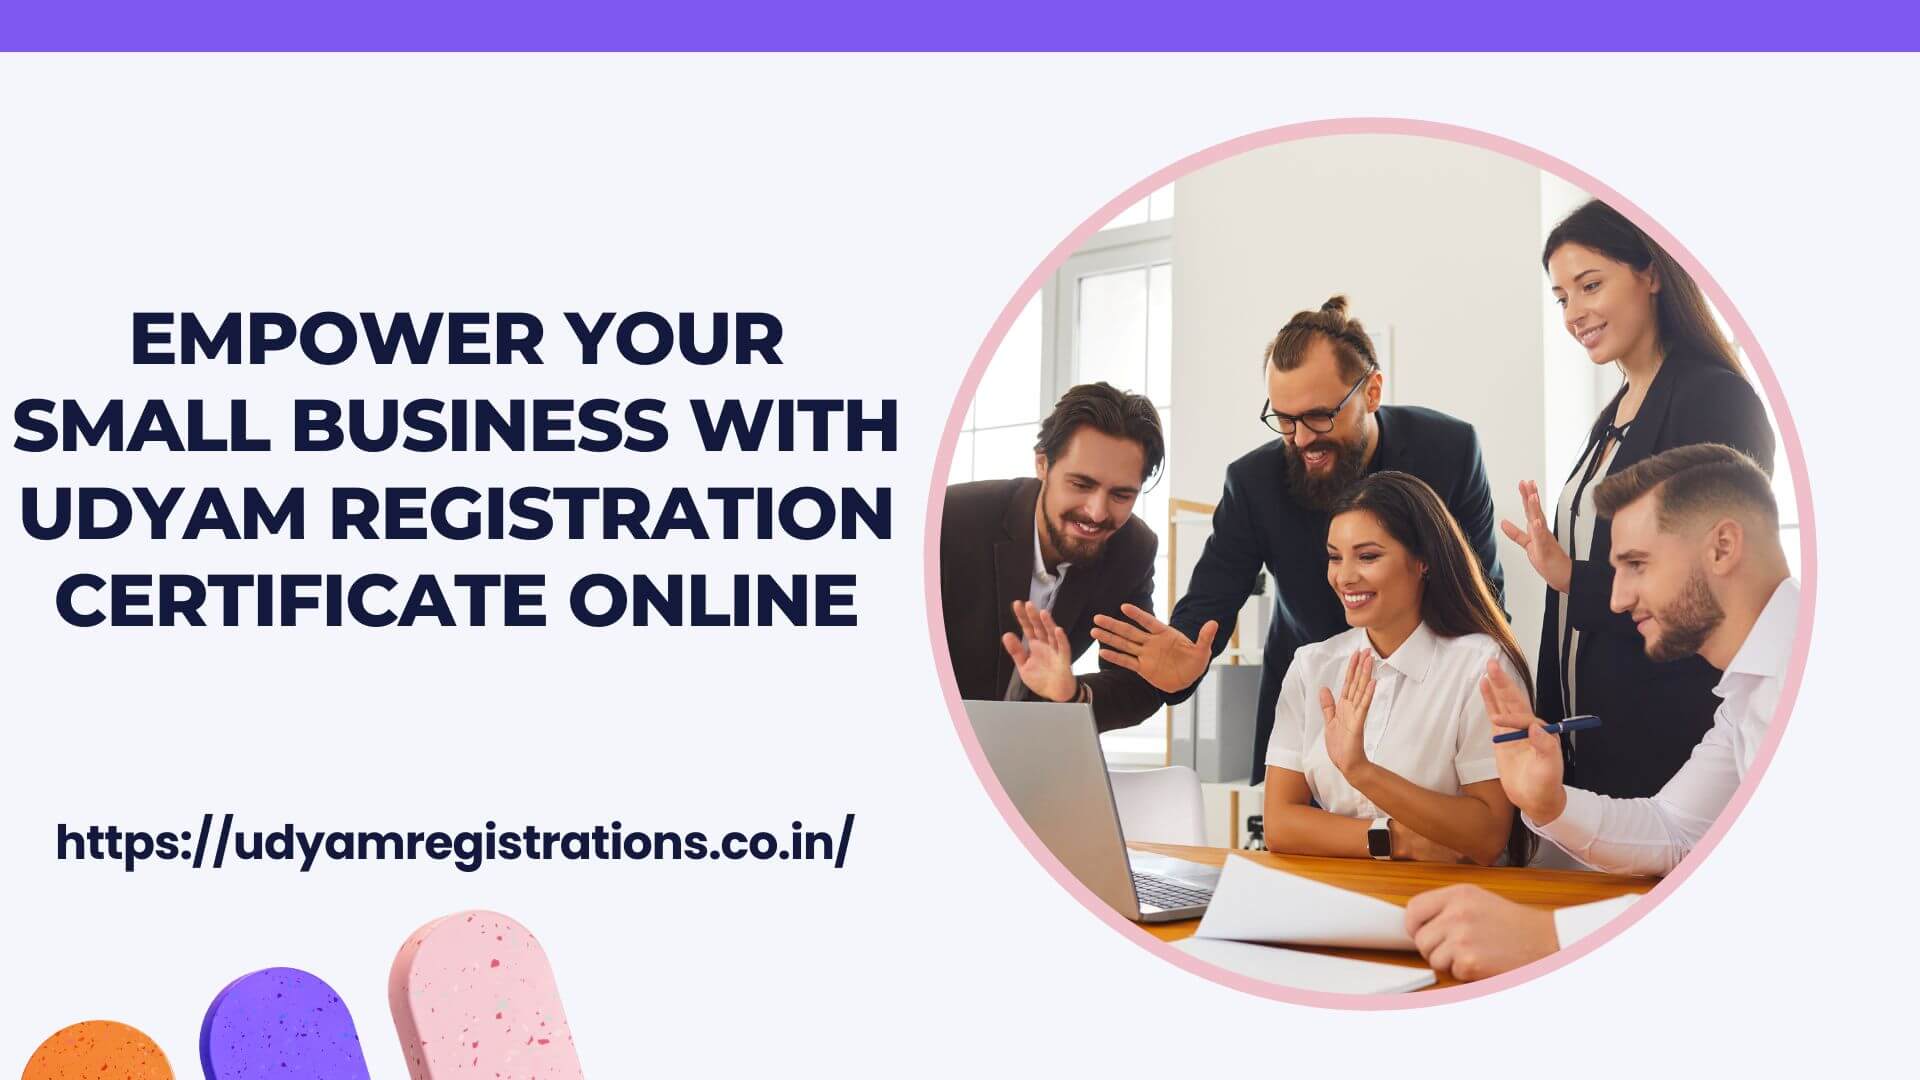 Empower Your Small Business with Udyam Registration Certificate Online